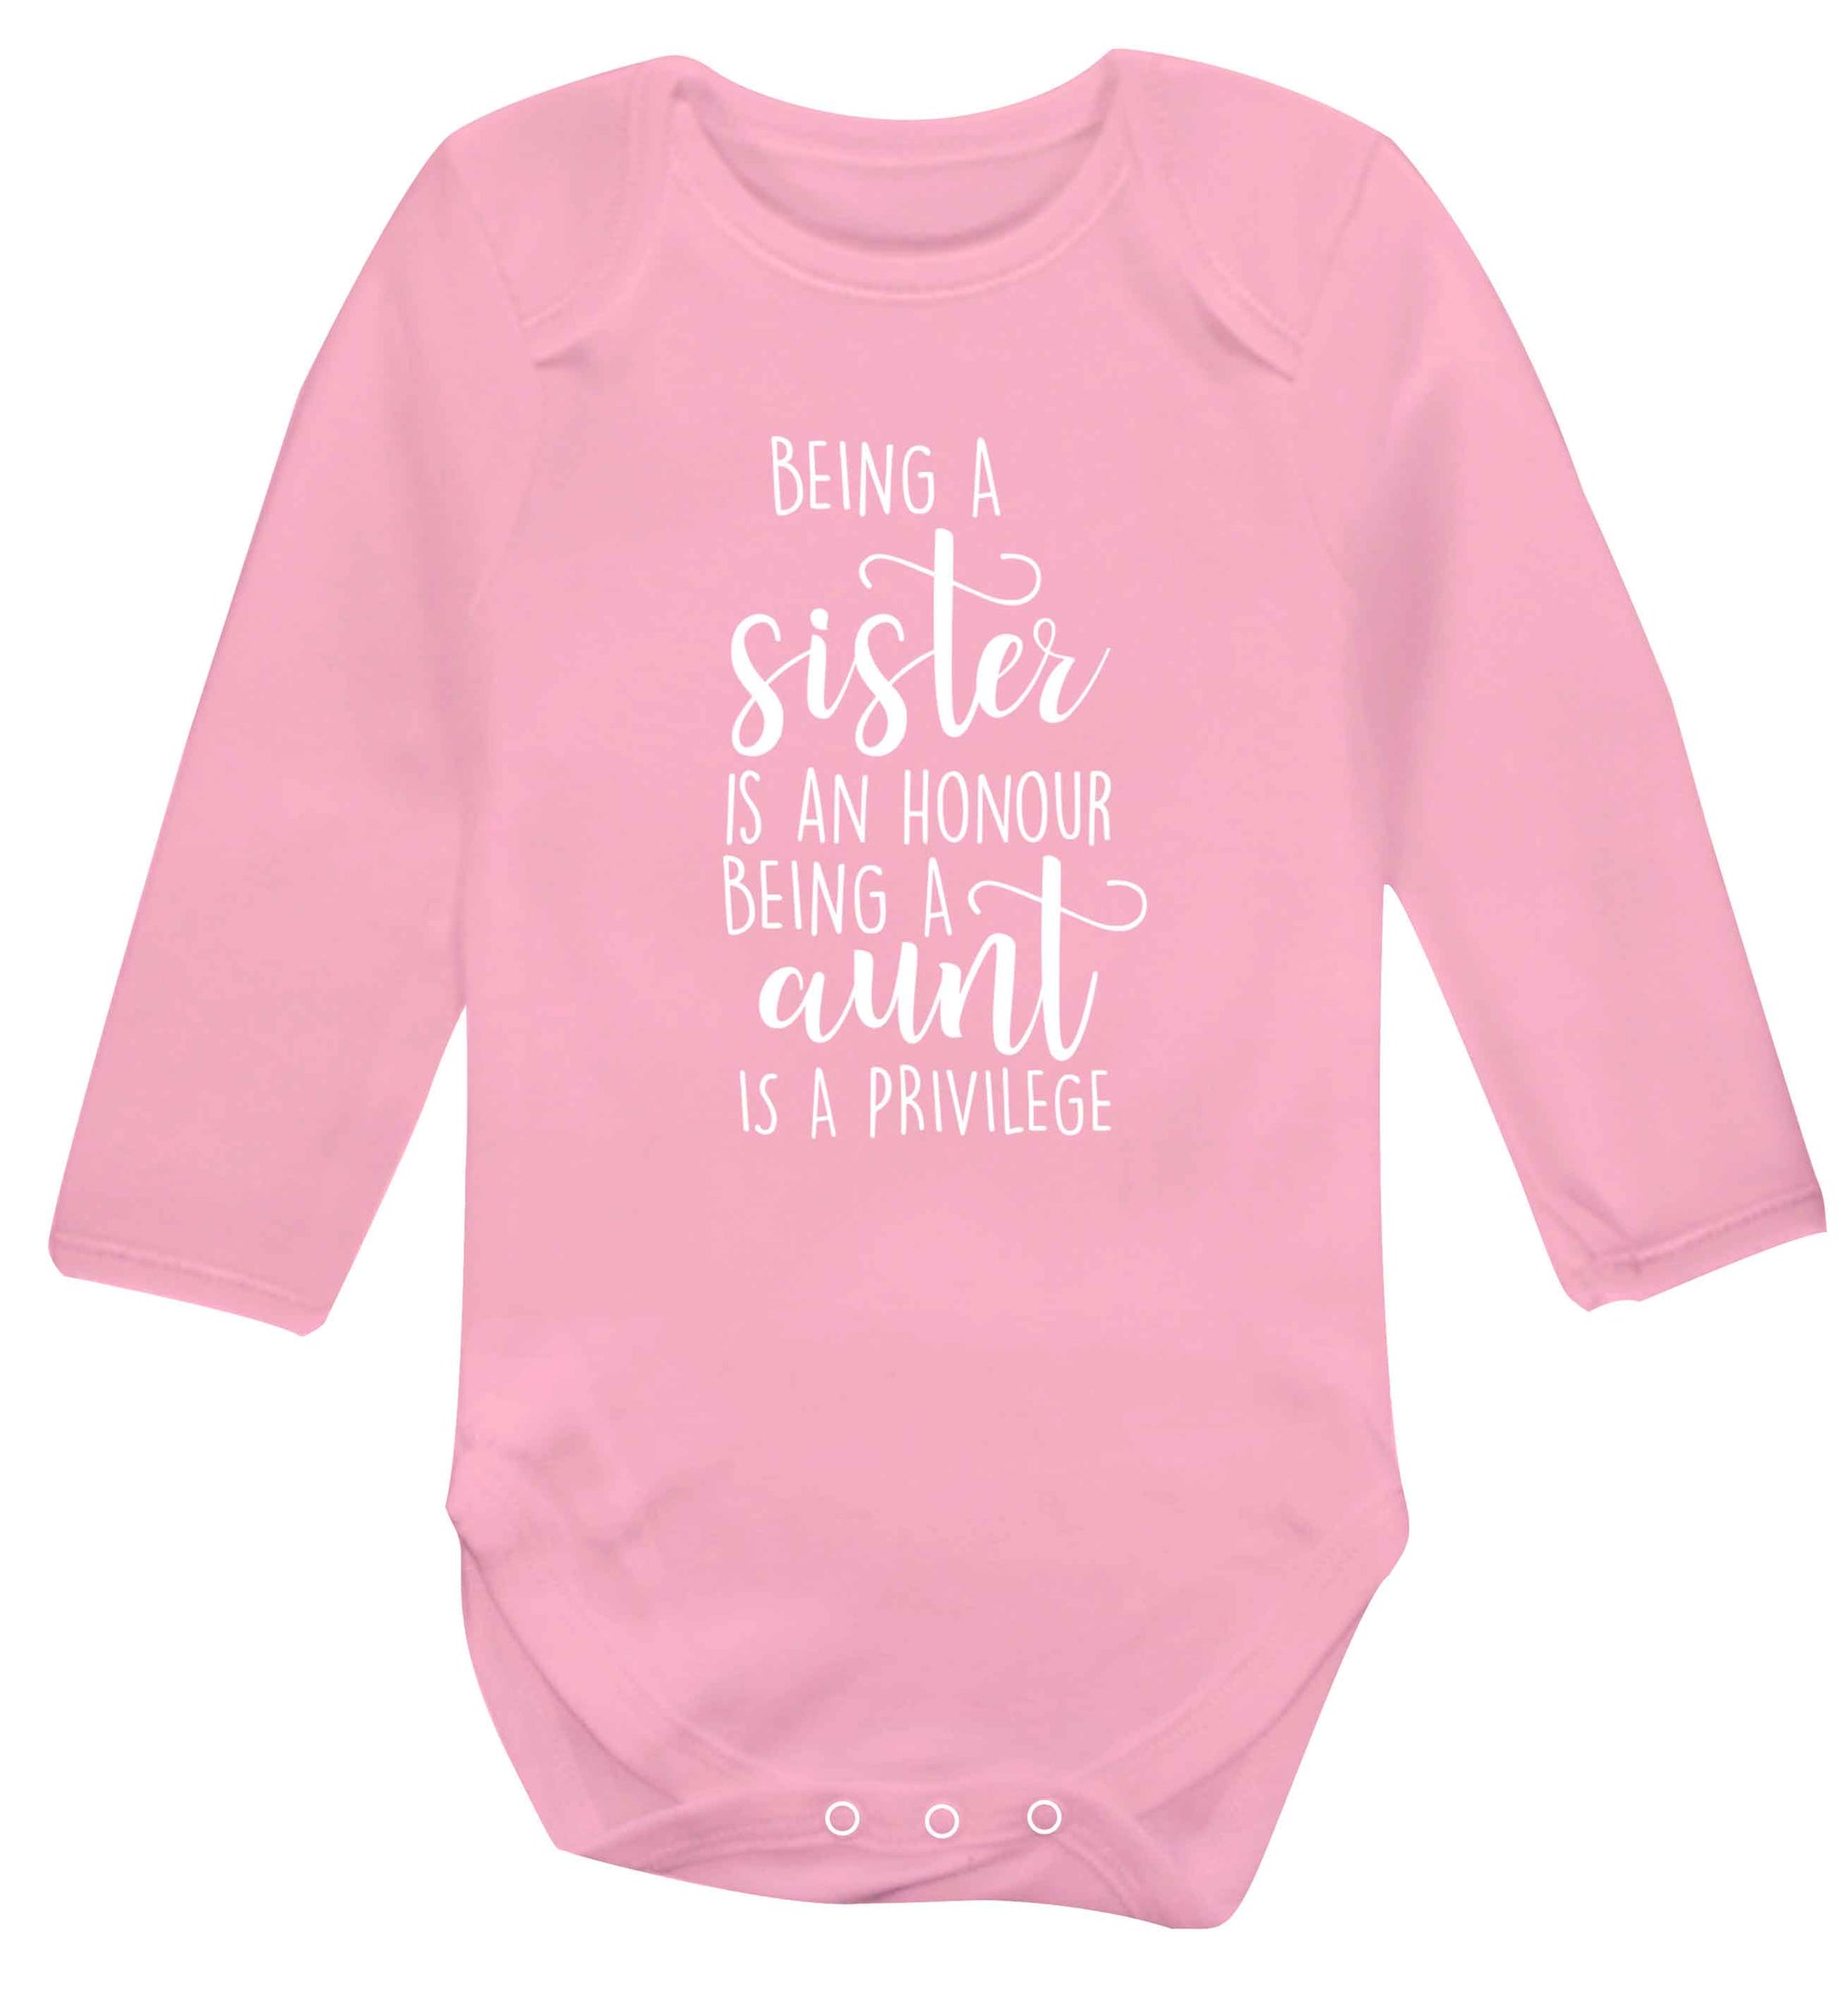 Being a sister is an honour being an auntie is a privilege Baby Vest long sleeved pale pink 6-12 months